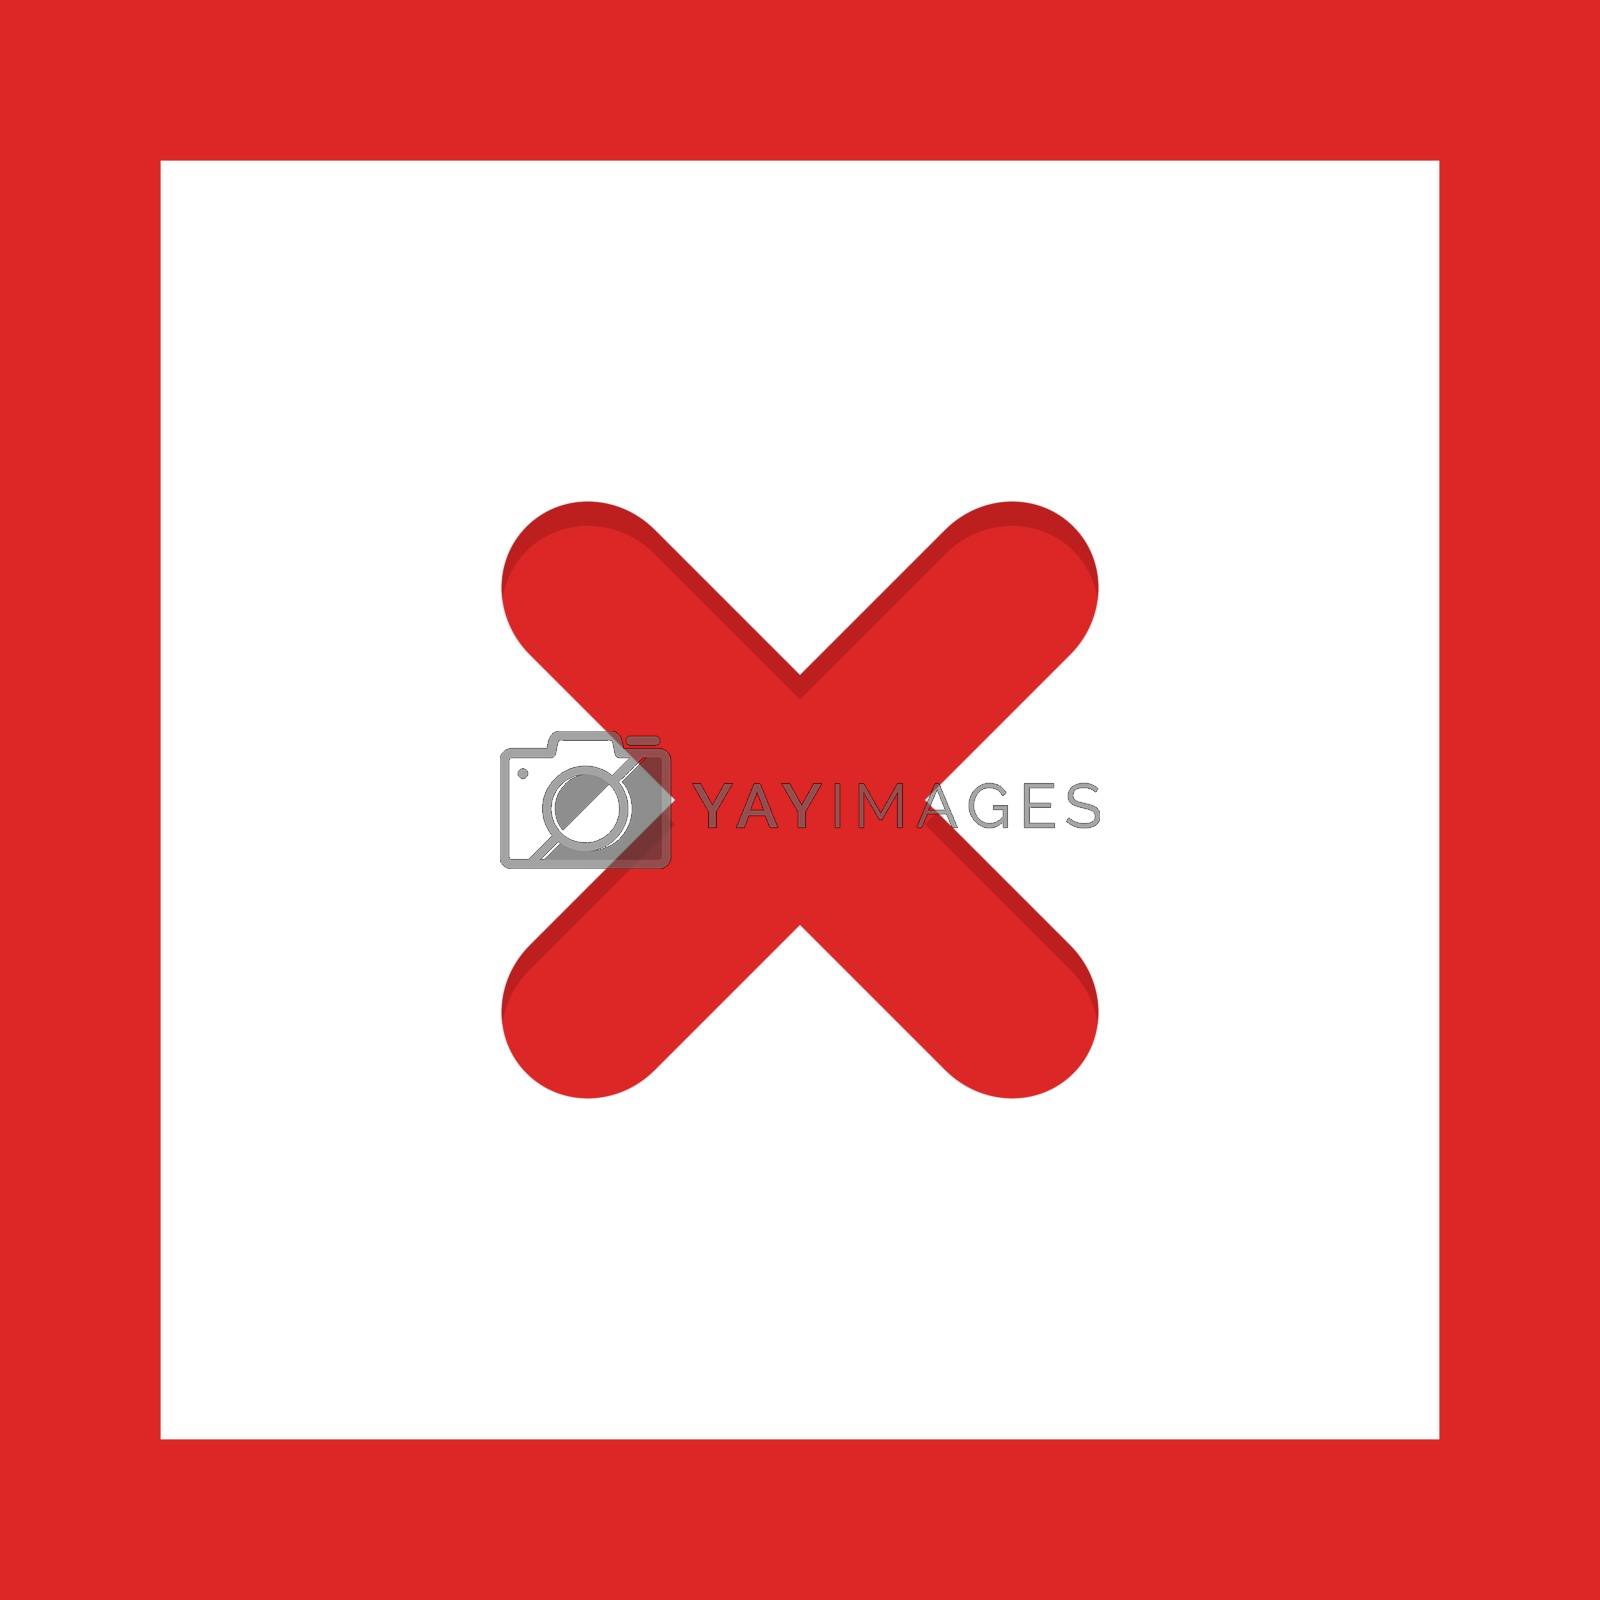 Royalty free image of Wrong marks, Cross marks, Rejected, Disapproved, No, False, Not  by Tsunami Designer